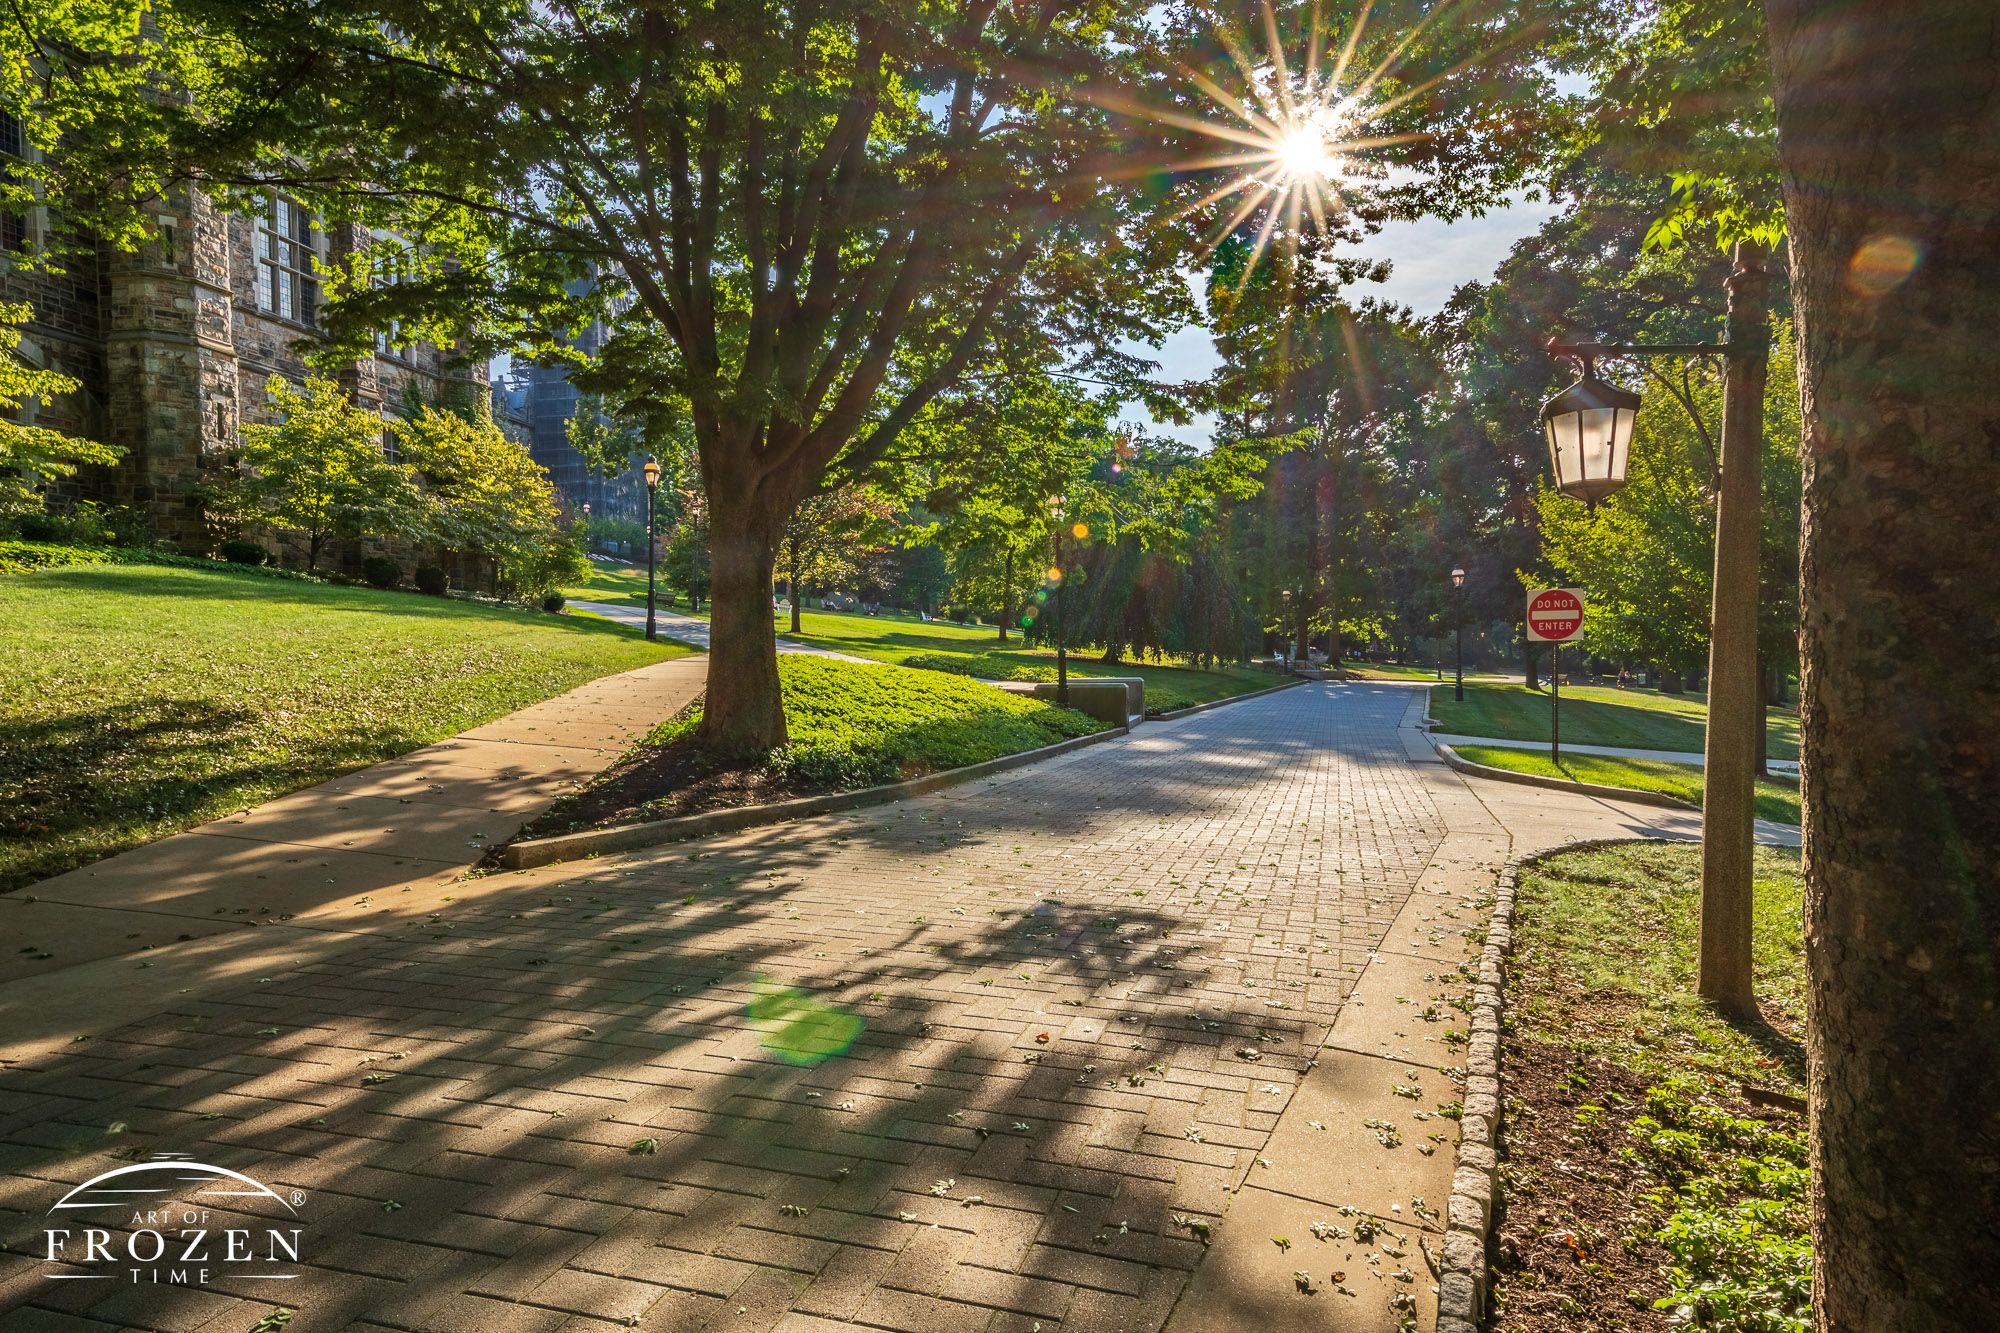 Memorial Walk on Lehigh University is a wide pedestrian avenue lined sculptures and trees which on this evening gently filtered the golden sunlight